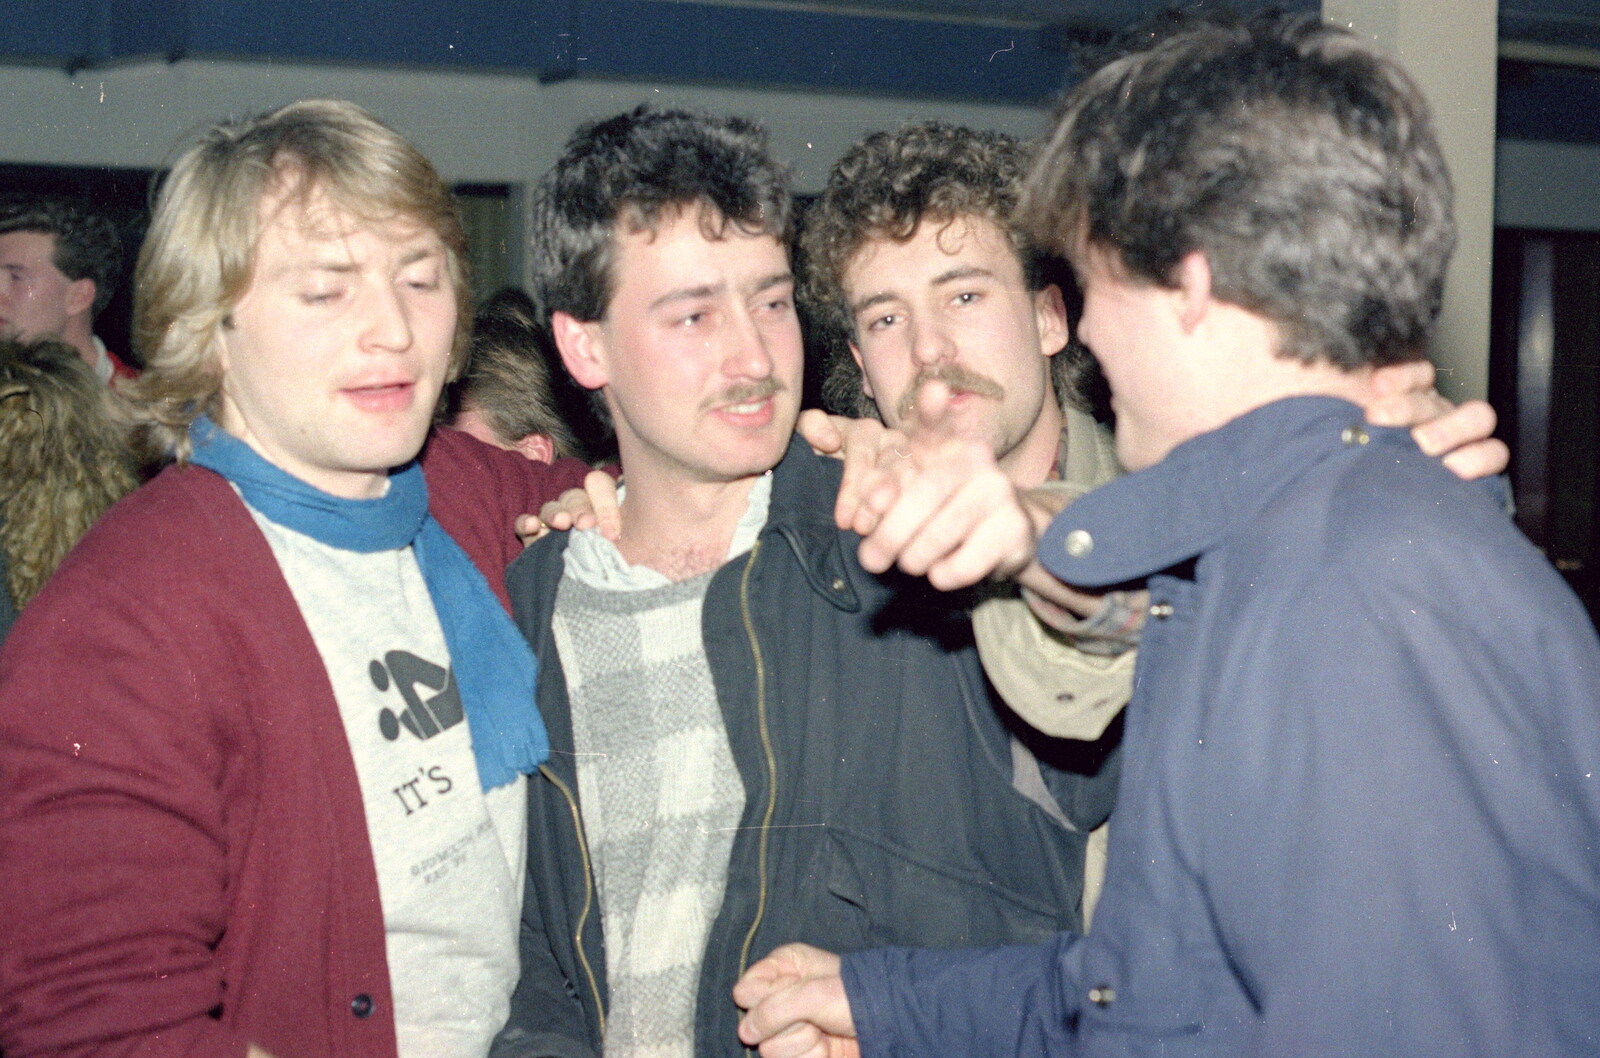 Justin, Mark and Sam Kennedy in the SU from Uni: PPSU Sabbatical Election Hustings, Plymouth - 10th February 1986